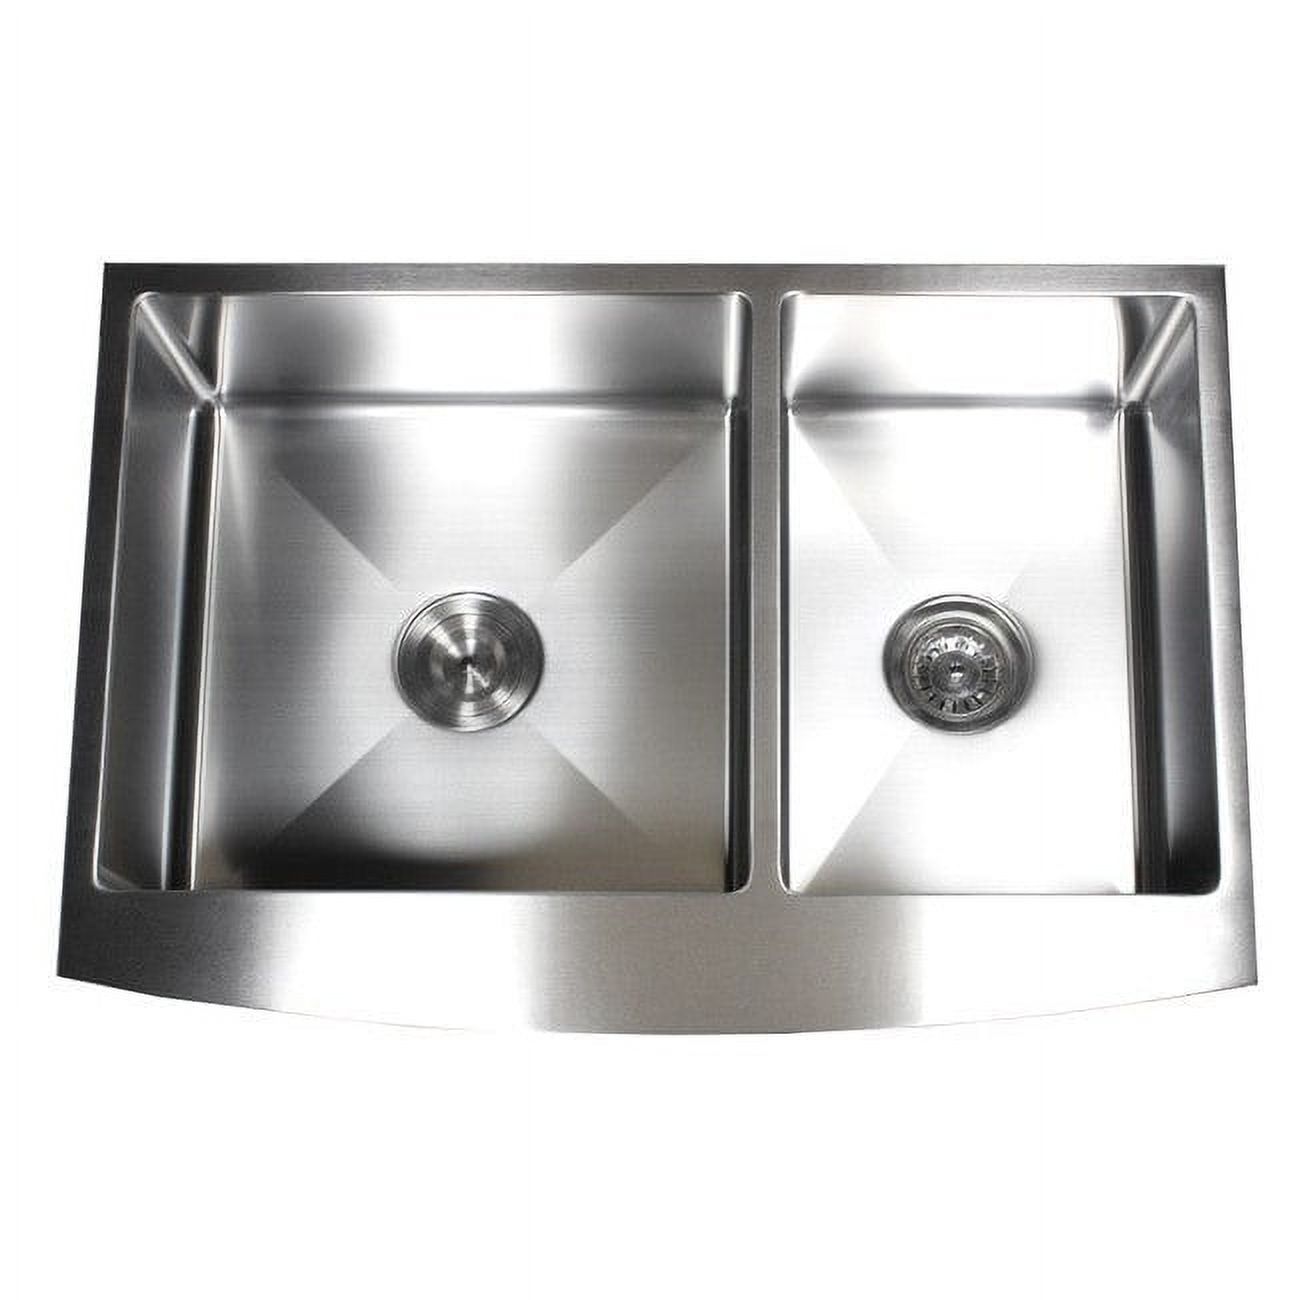 Contempo Living Inc 36-inch 15mm Curved Front Farm Apron 60/40 Double Bowl Kitchen Sink - image 1 of 5